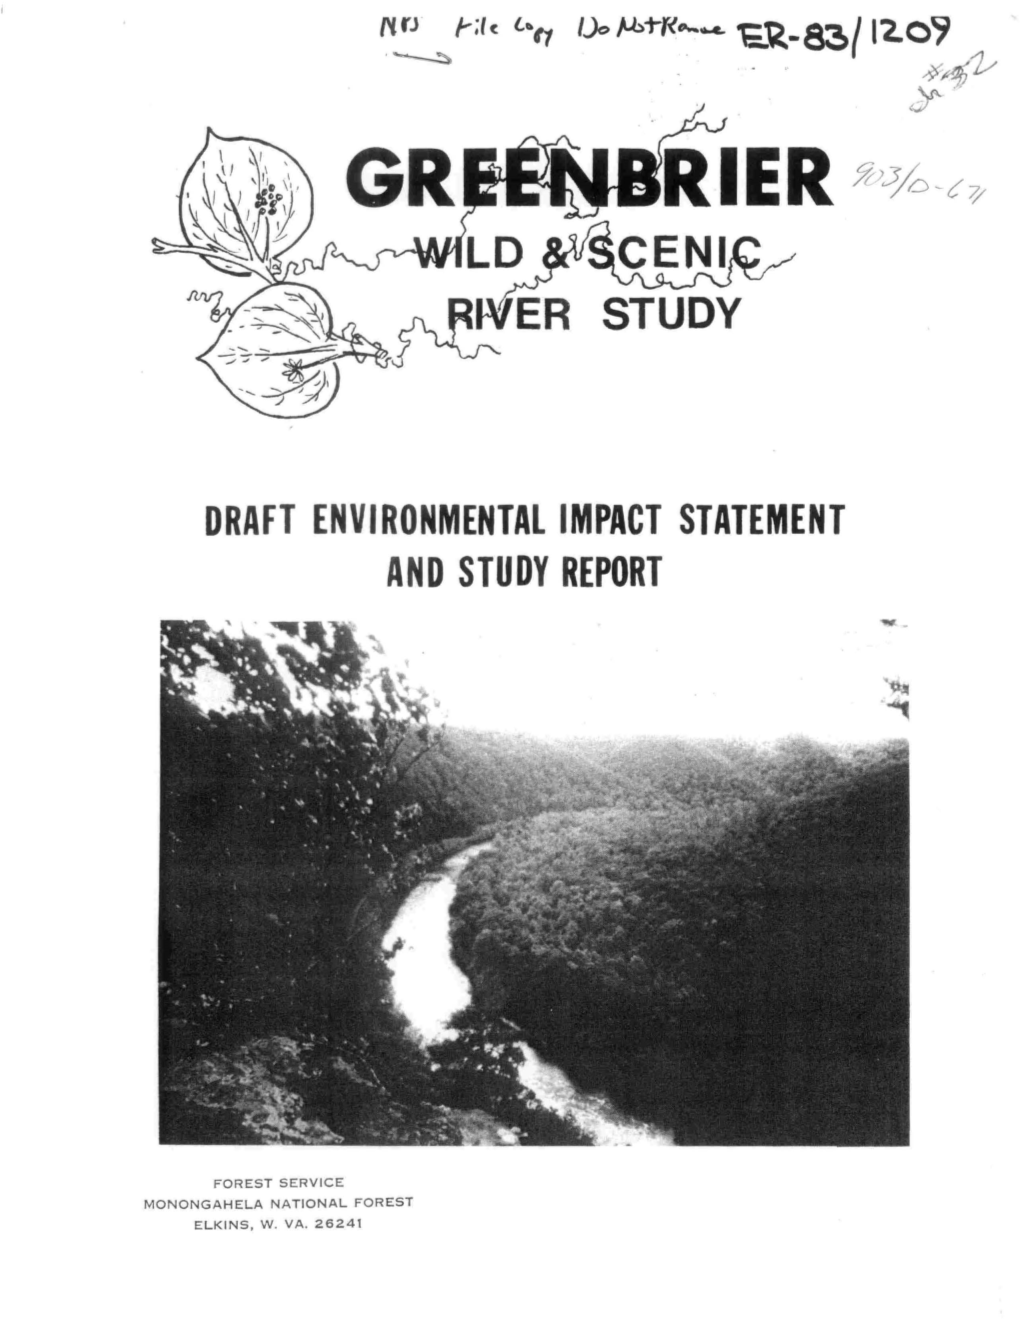 Draft Environmental Impact Statement and Study Report